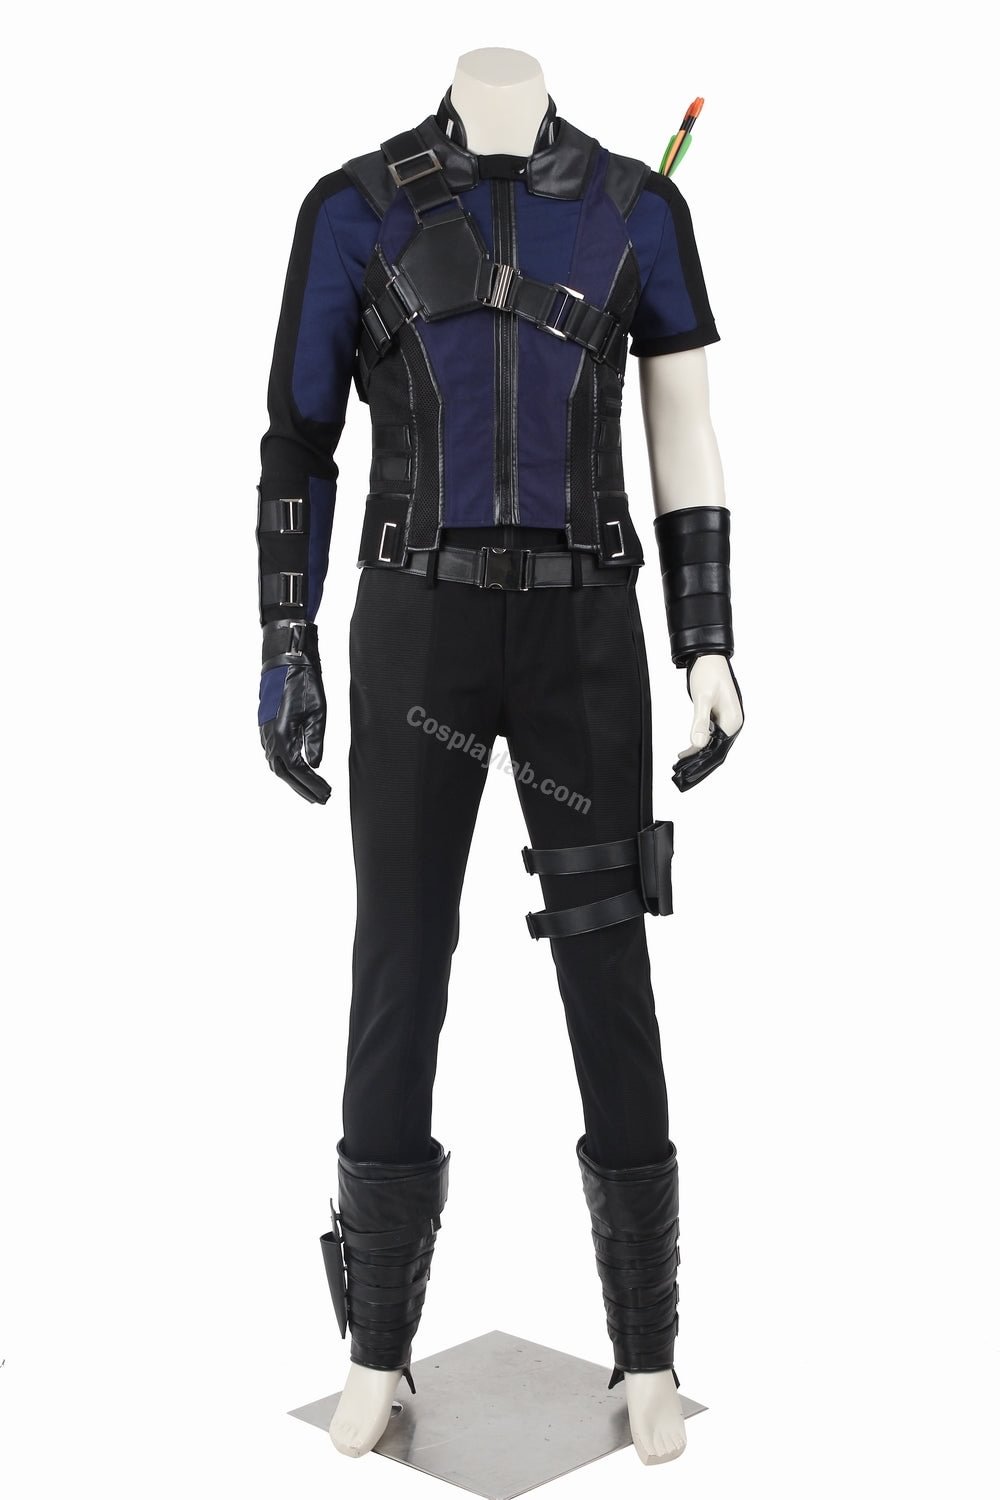 Captain America Civil War avengers Hawkeye Clint Barton Cosplay Costume suit outfit By CosplayLab